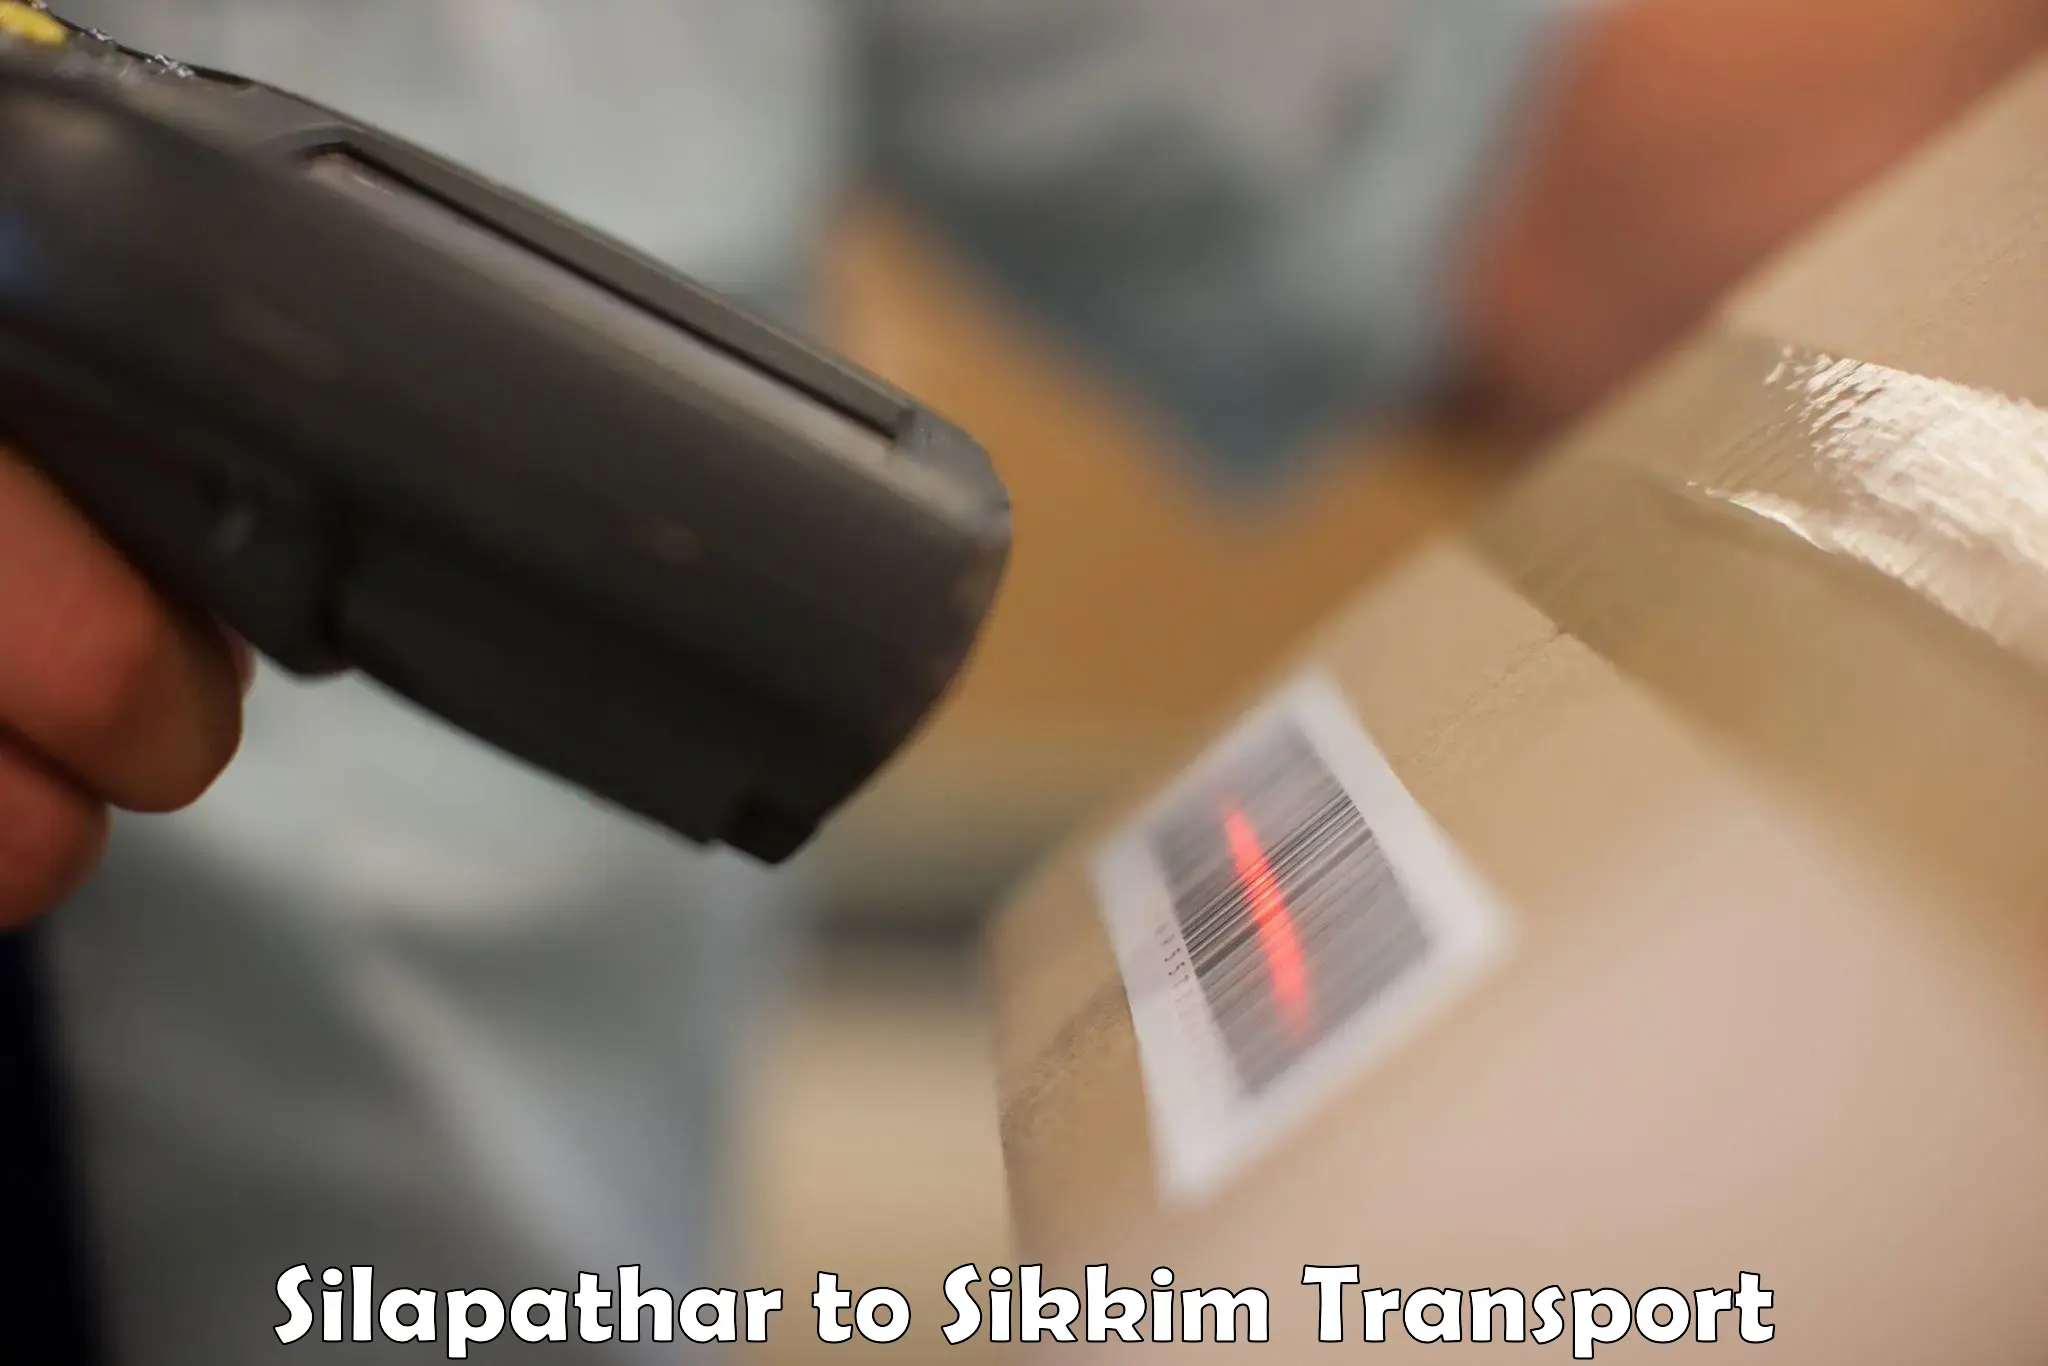 Daily transport service Silapathar to South Sikkim